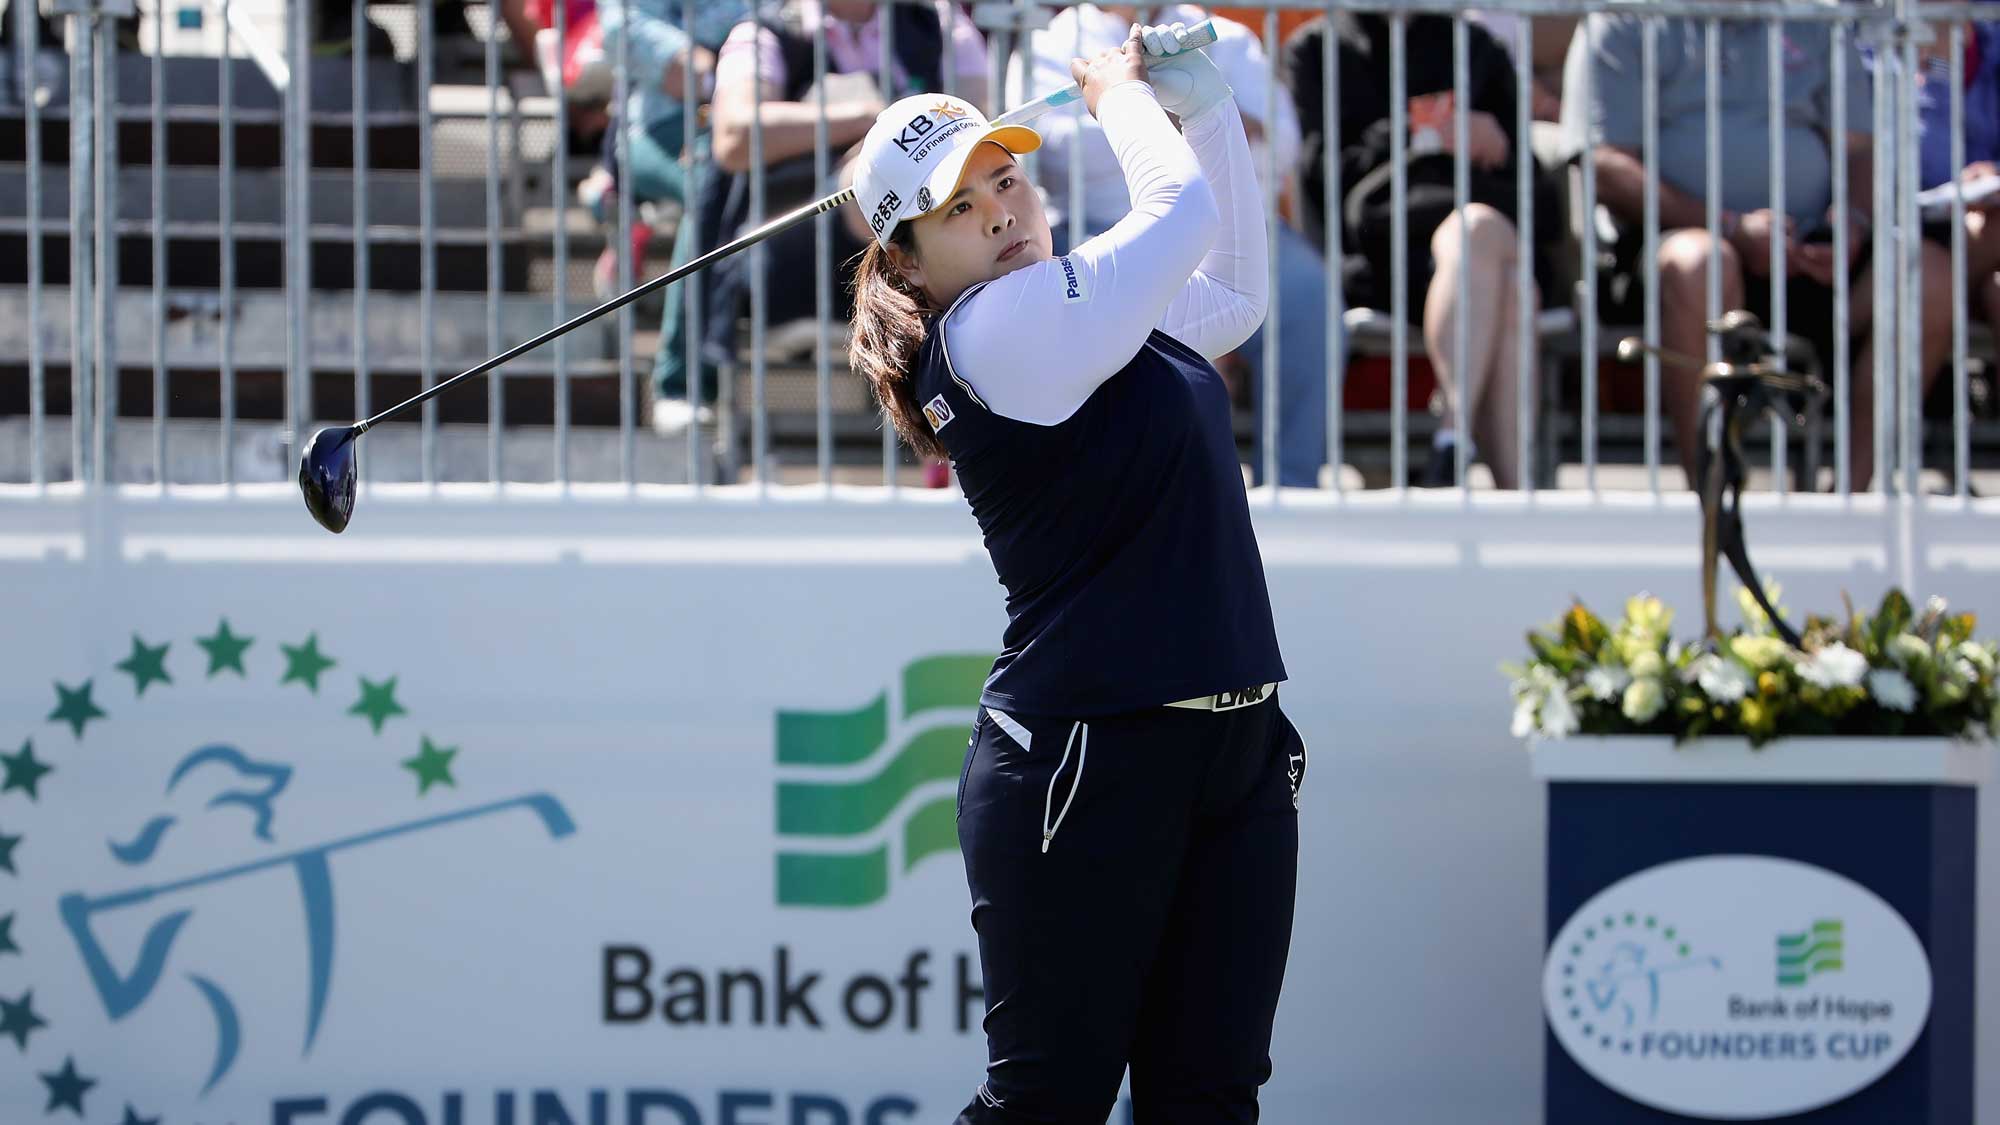 Inbee Park Tees Off Sunday at the Founders Cup 